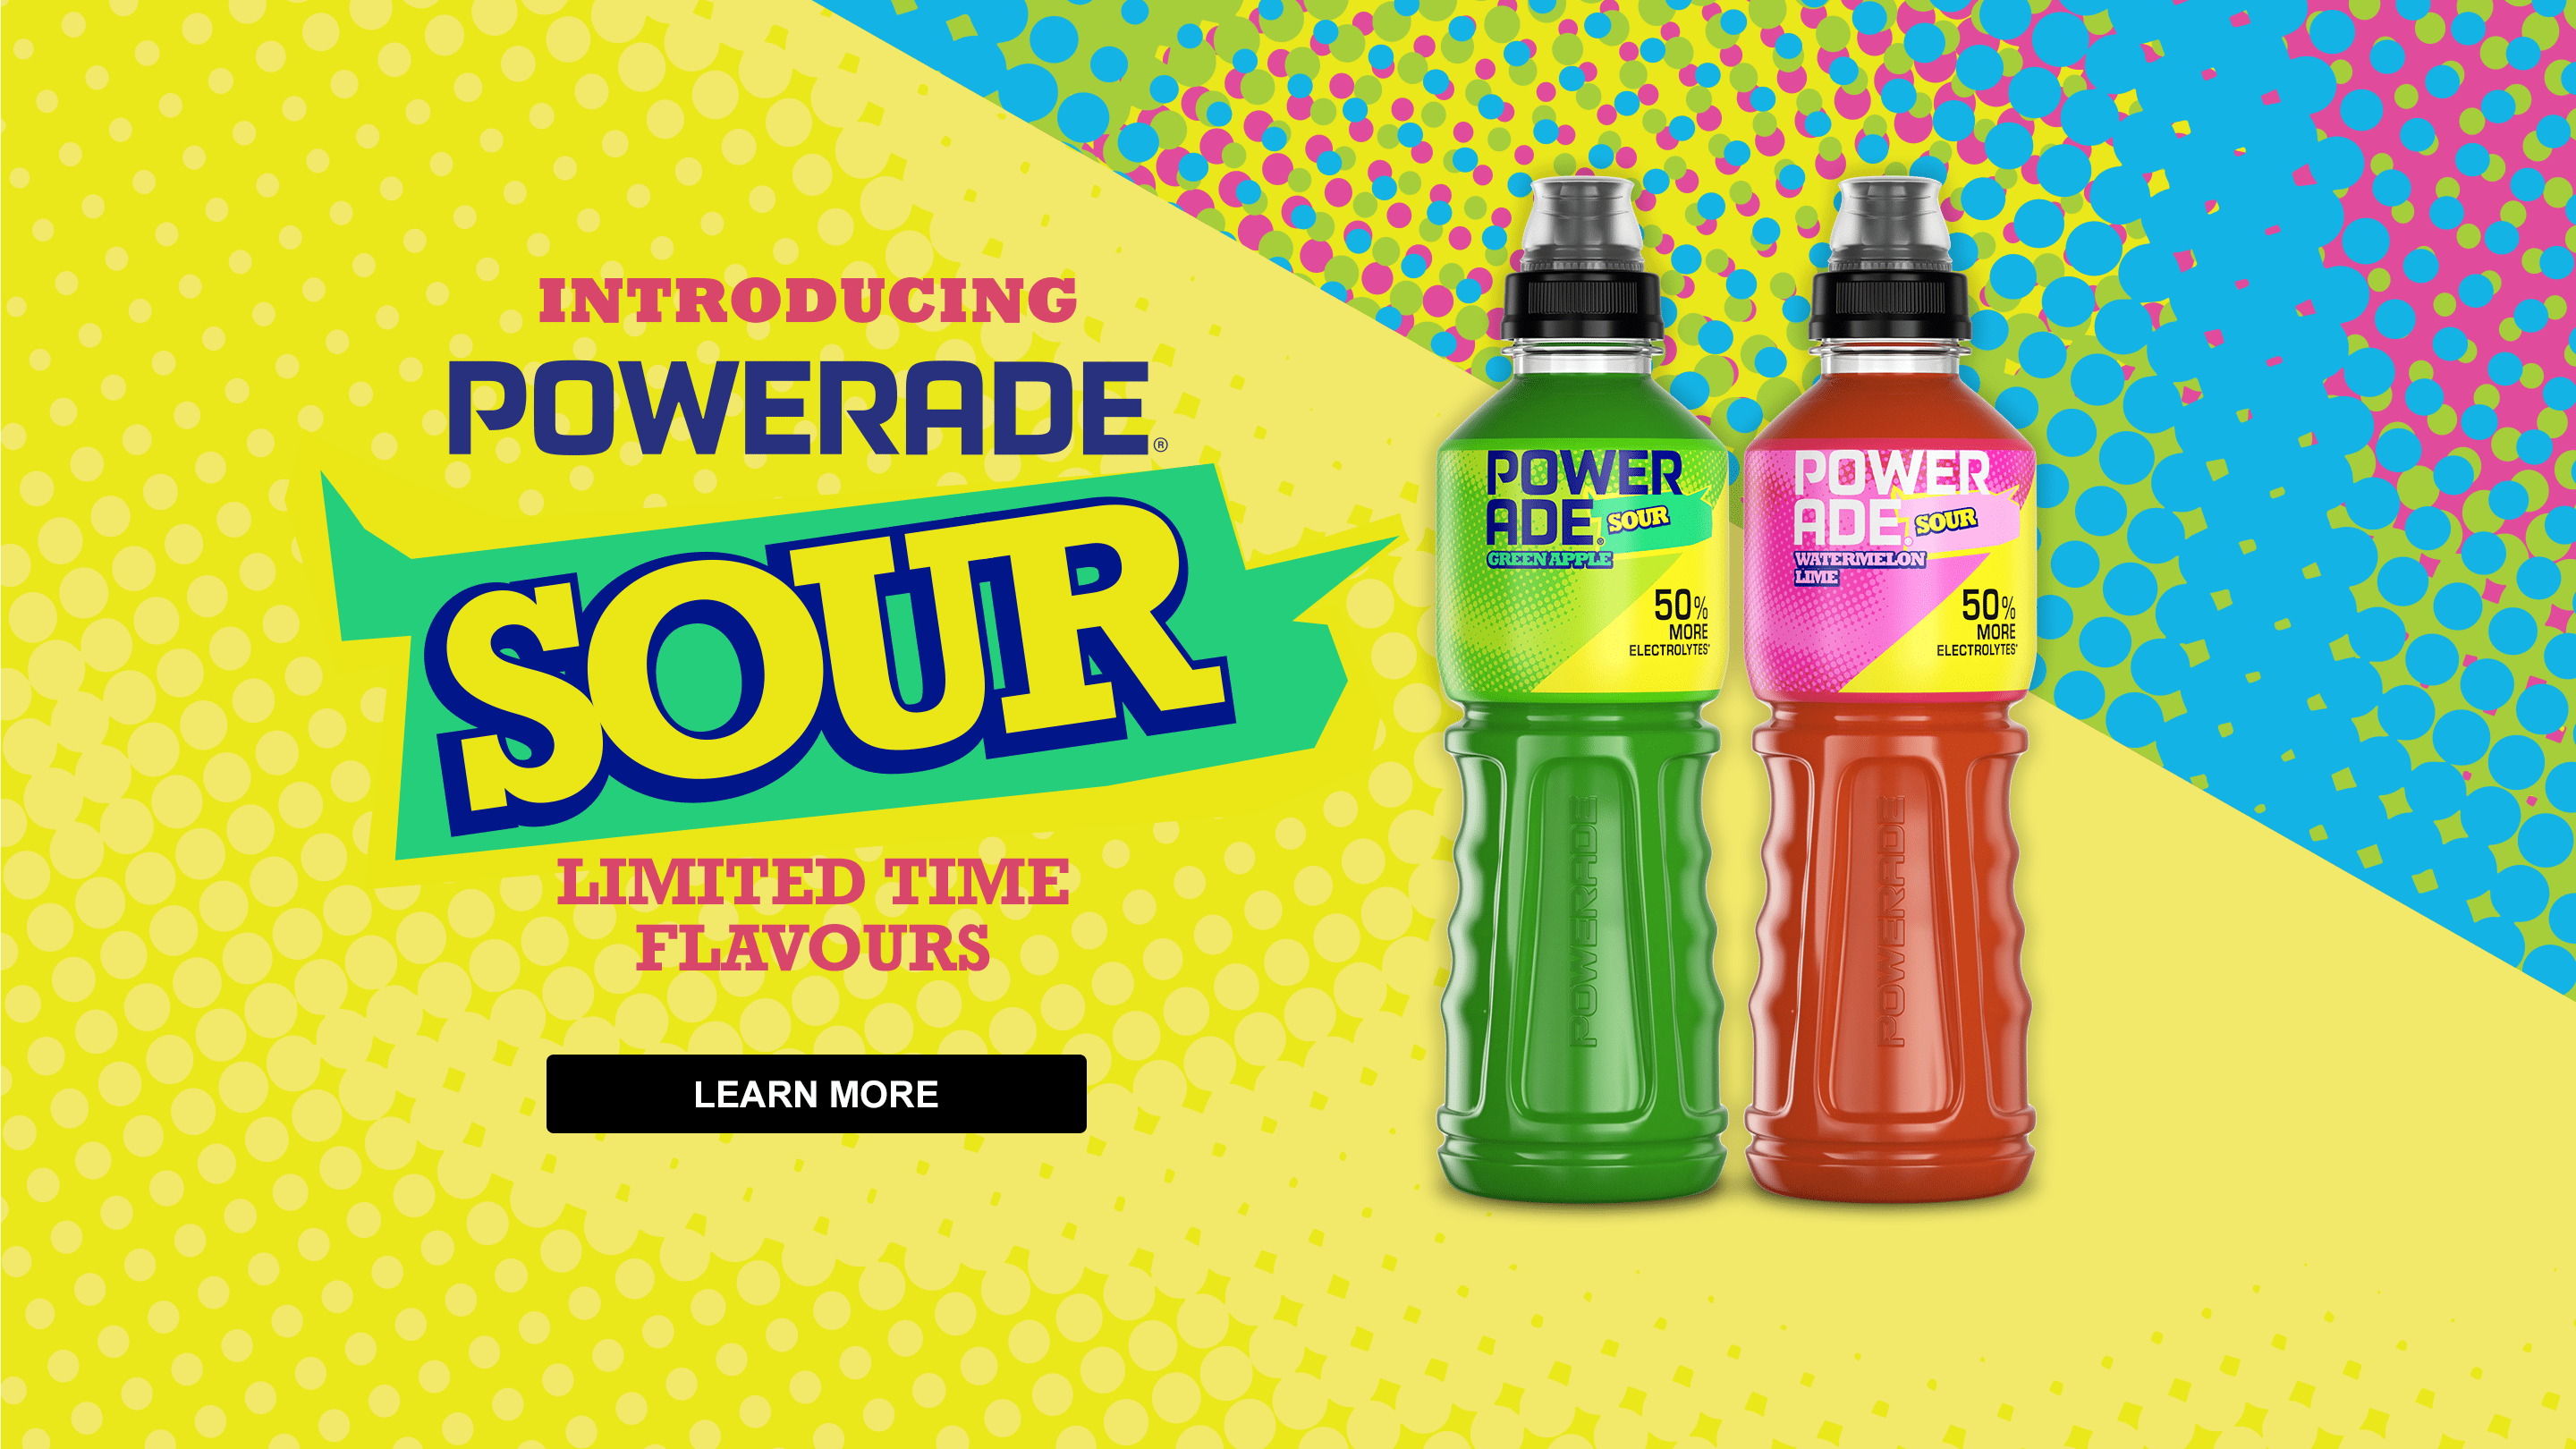 Introducing POWERADE SOUR. Limited Time Flavours. Learn more.